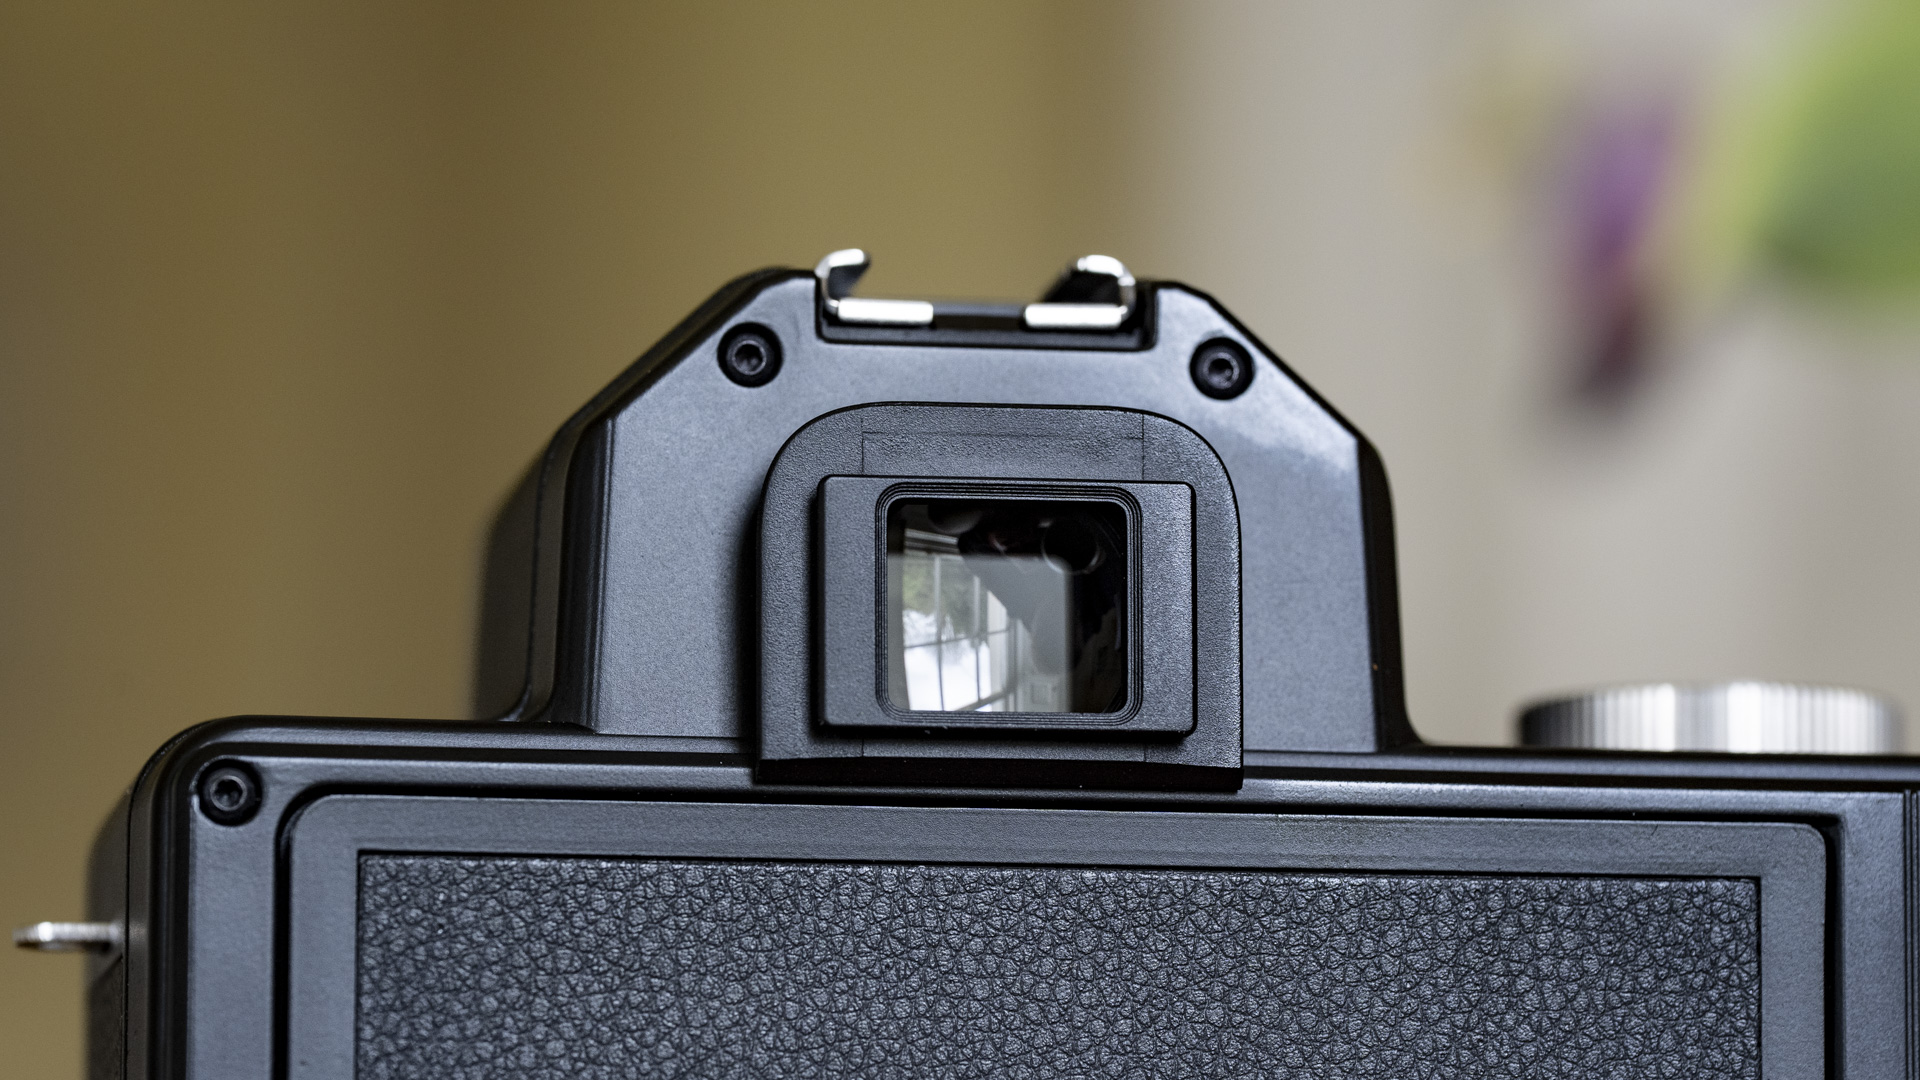 Closeup of the Nons SL660 instant camera's viewfinder